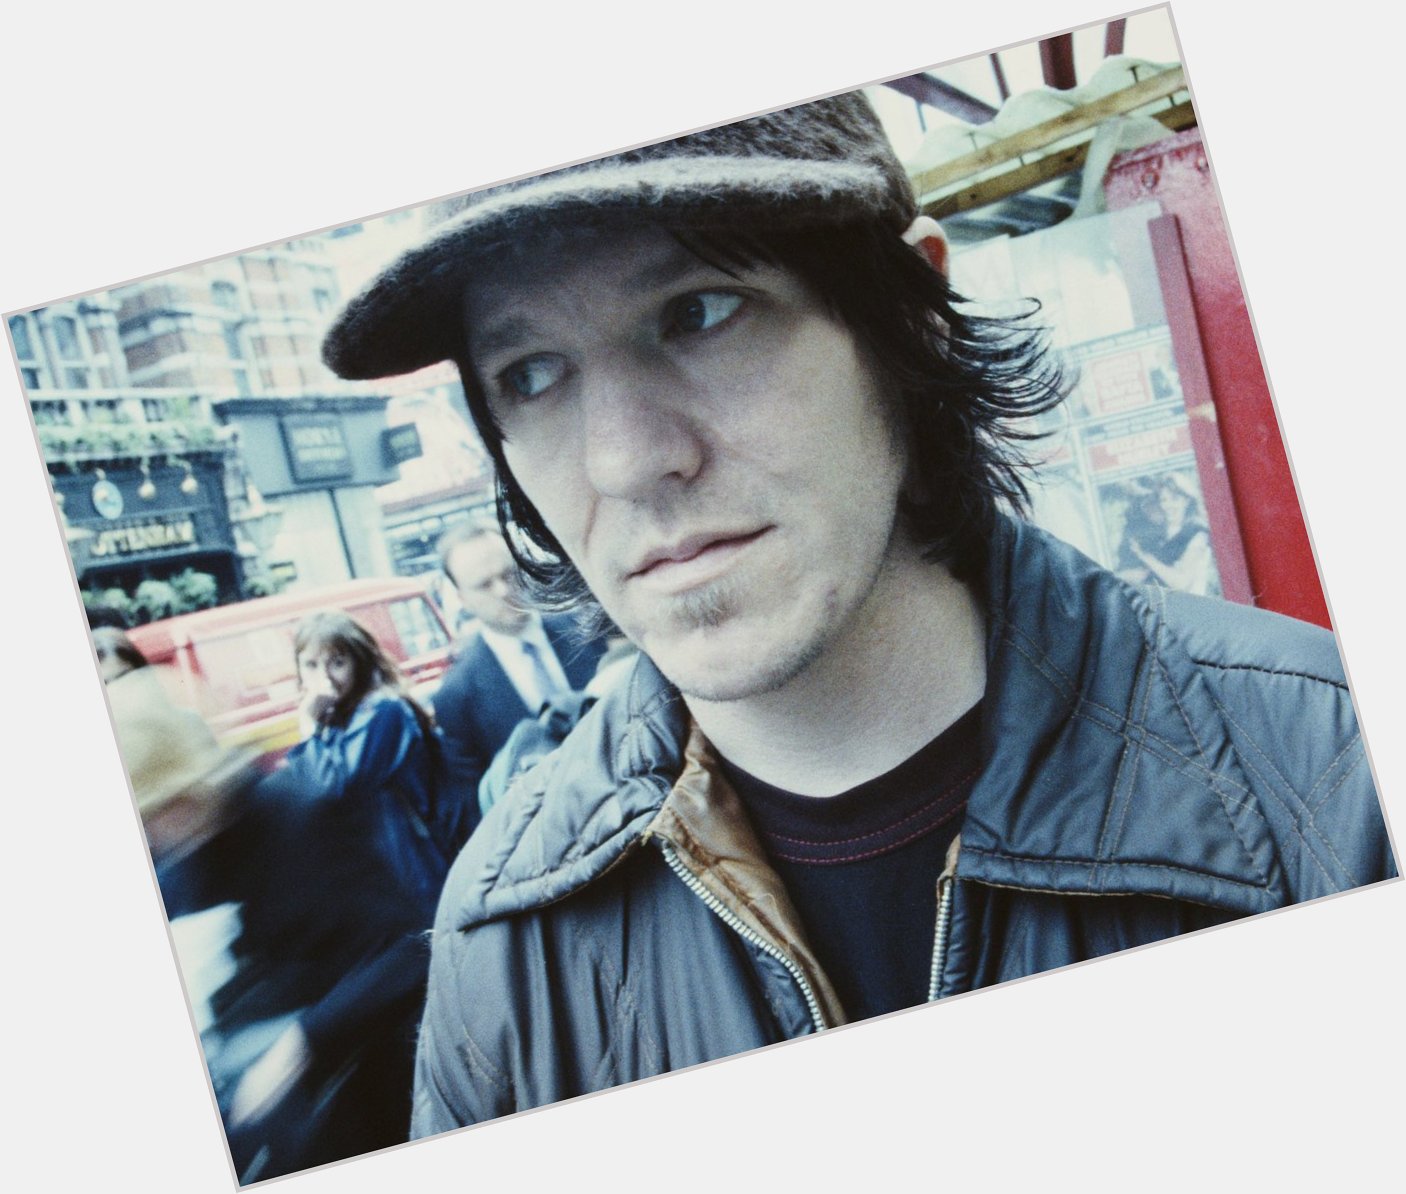 Happy birthday, elliott smith

your music is forever loved & listened 